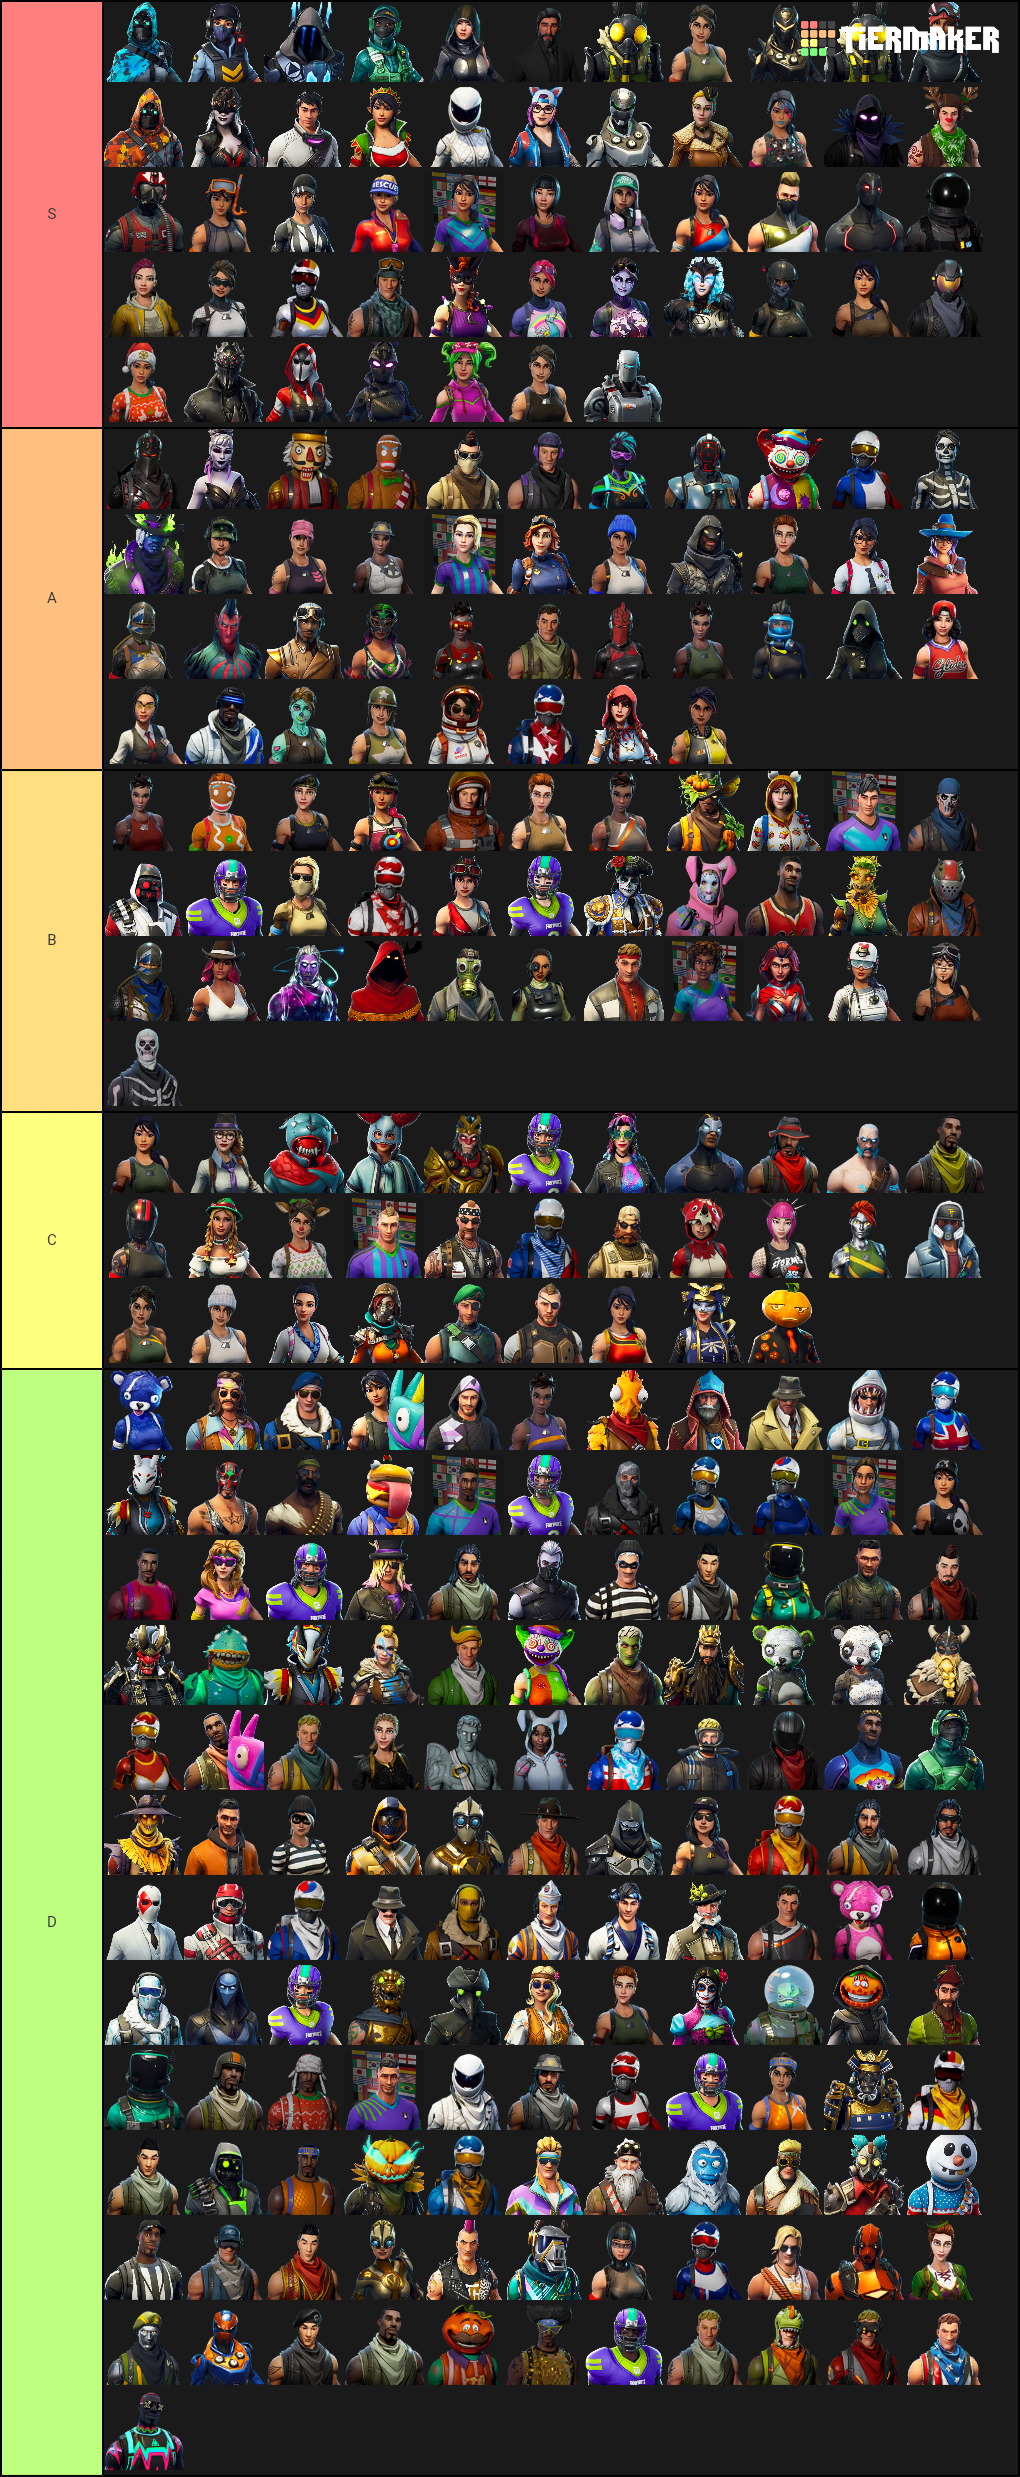 Create a Fortnite Skins (Outfits) Tier List - Tier Maker